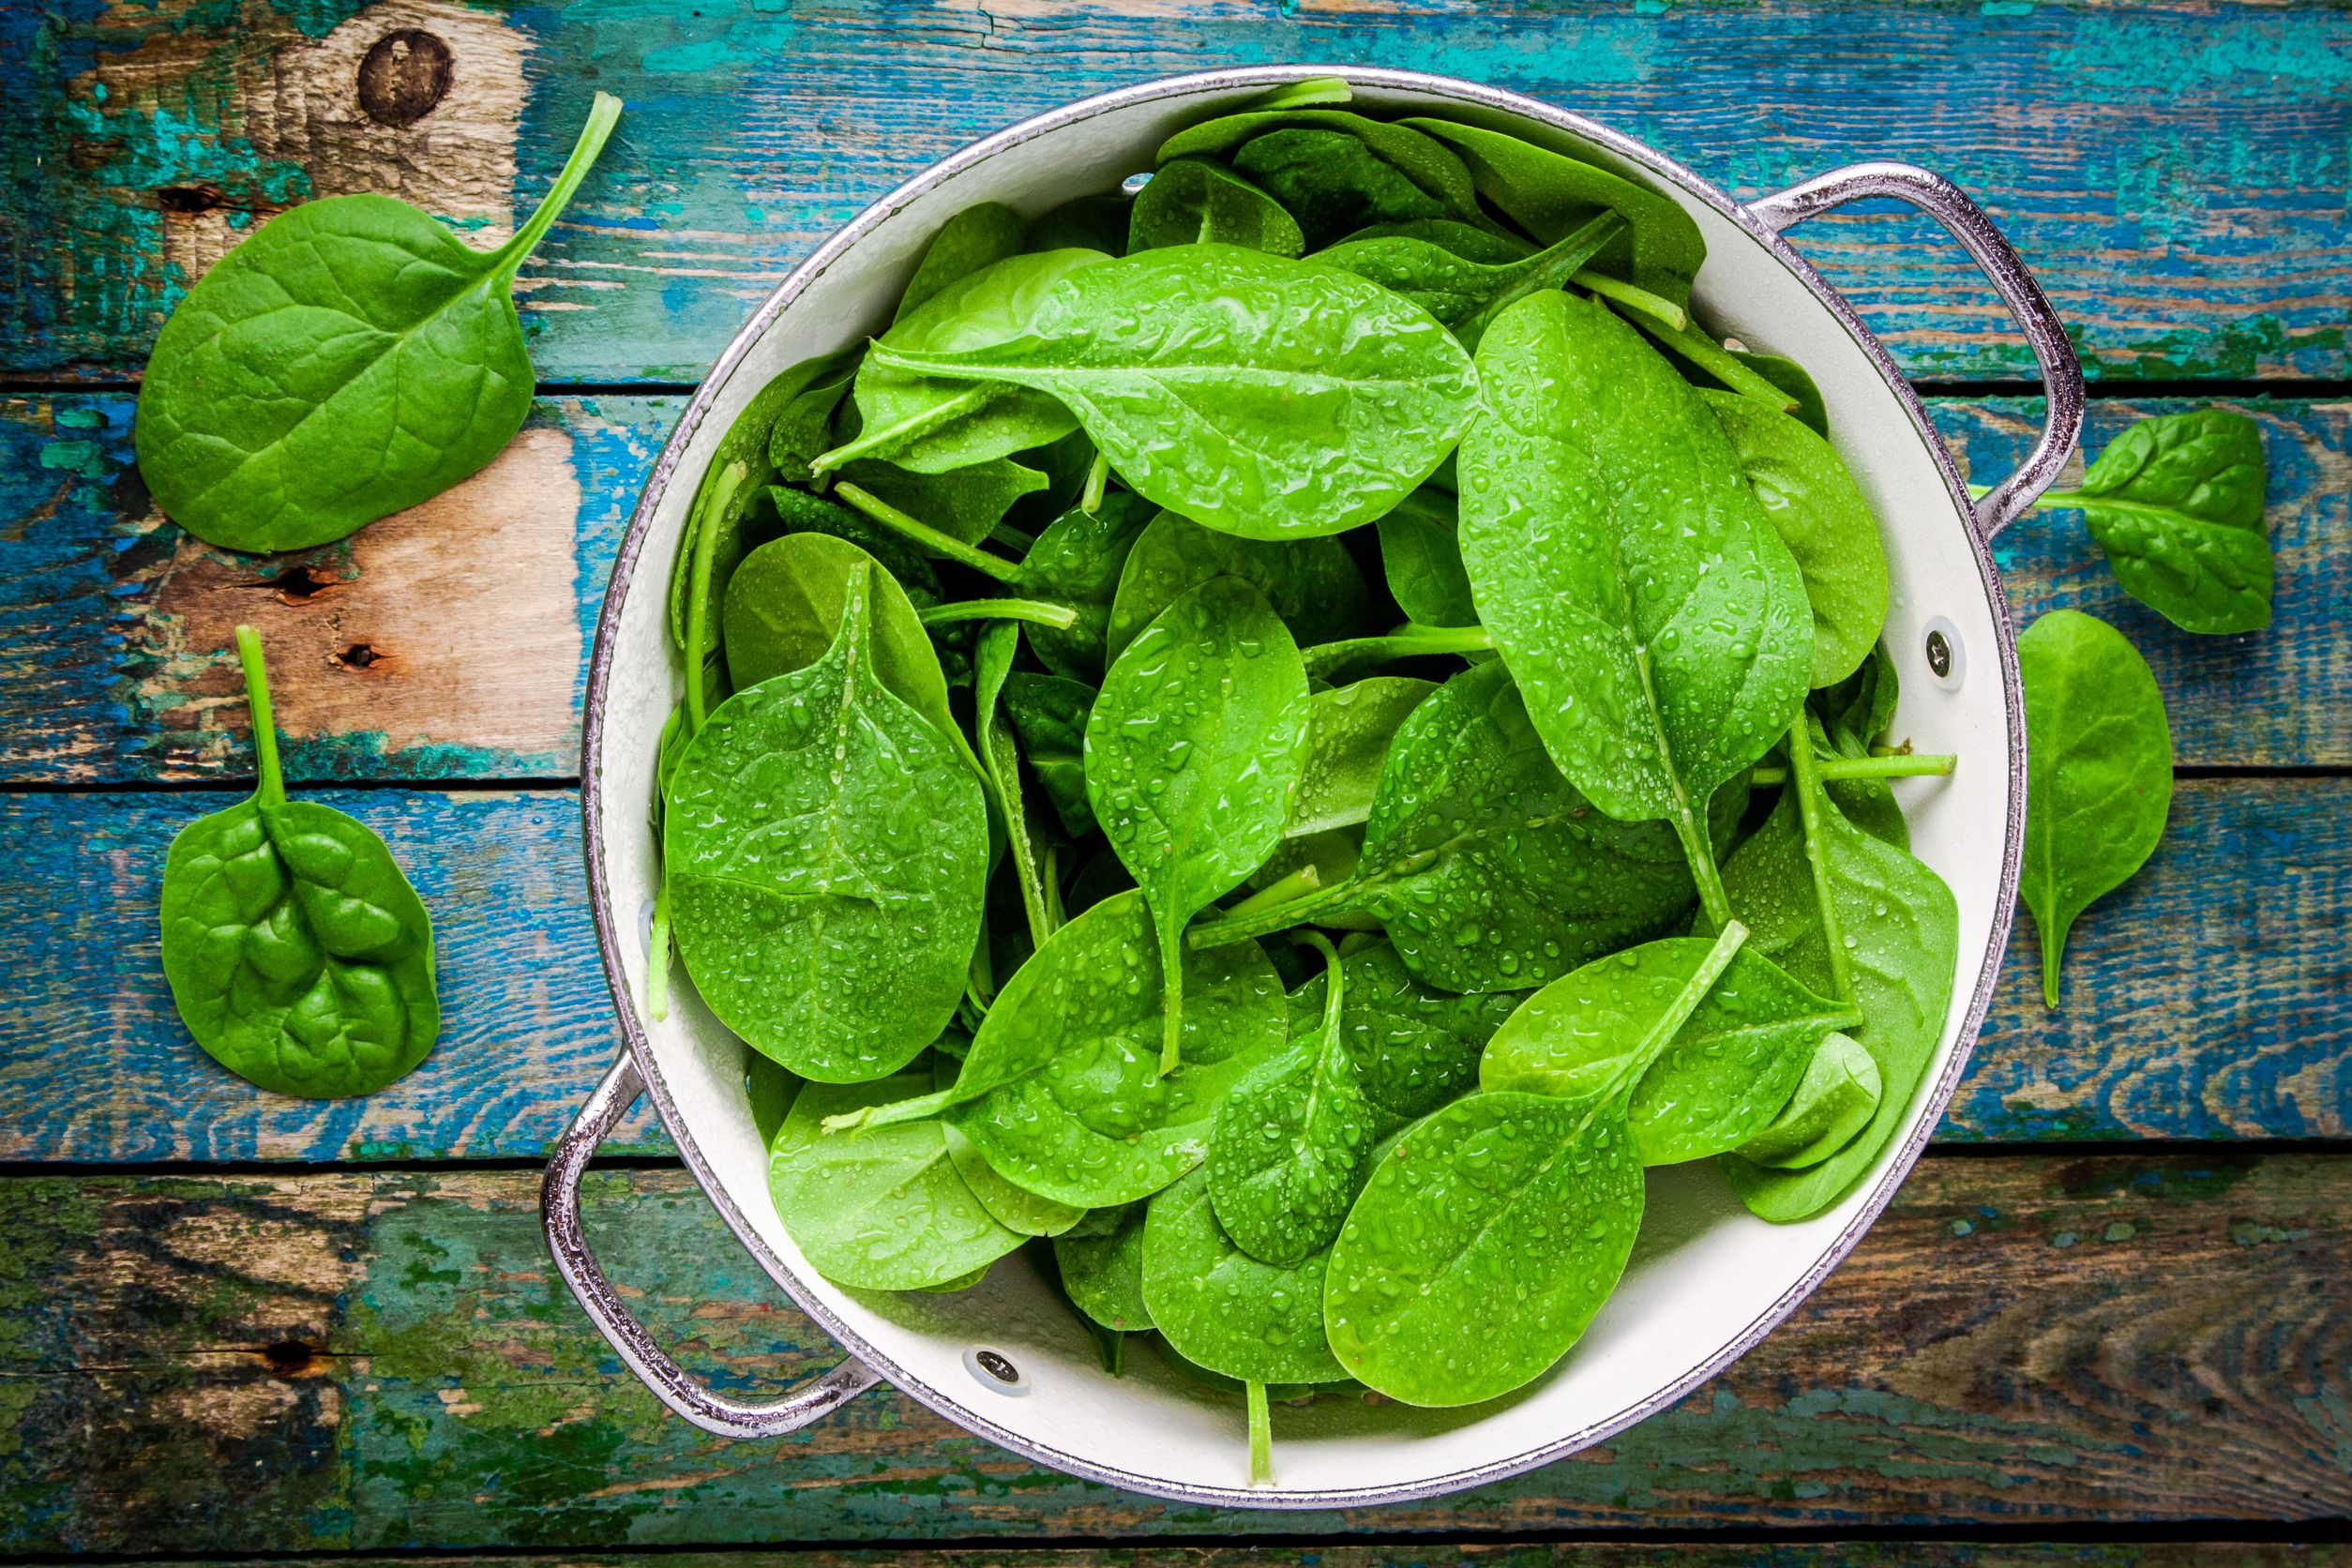 Superfood: Spinach